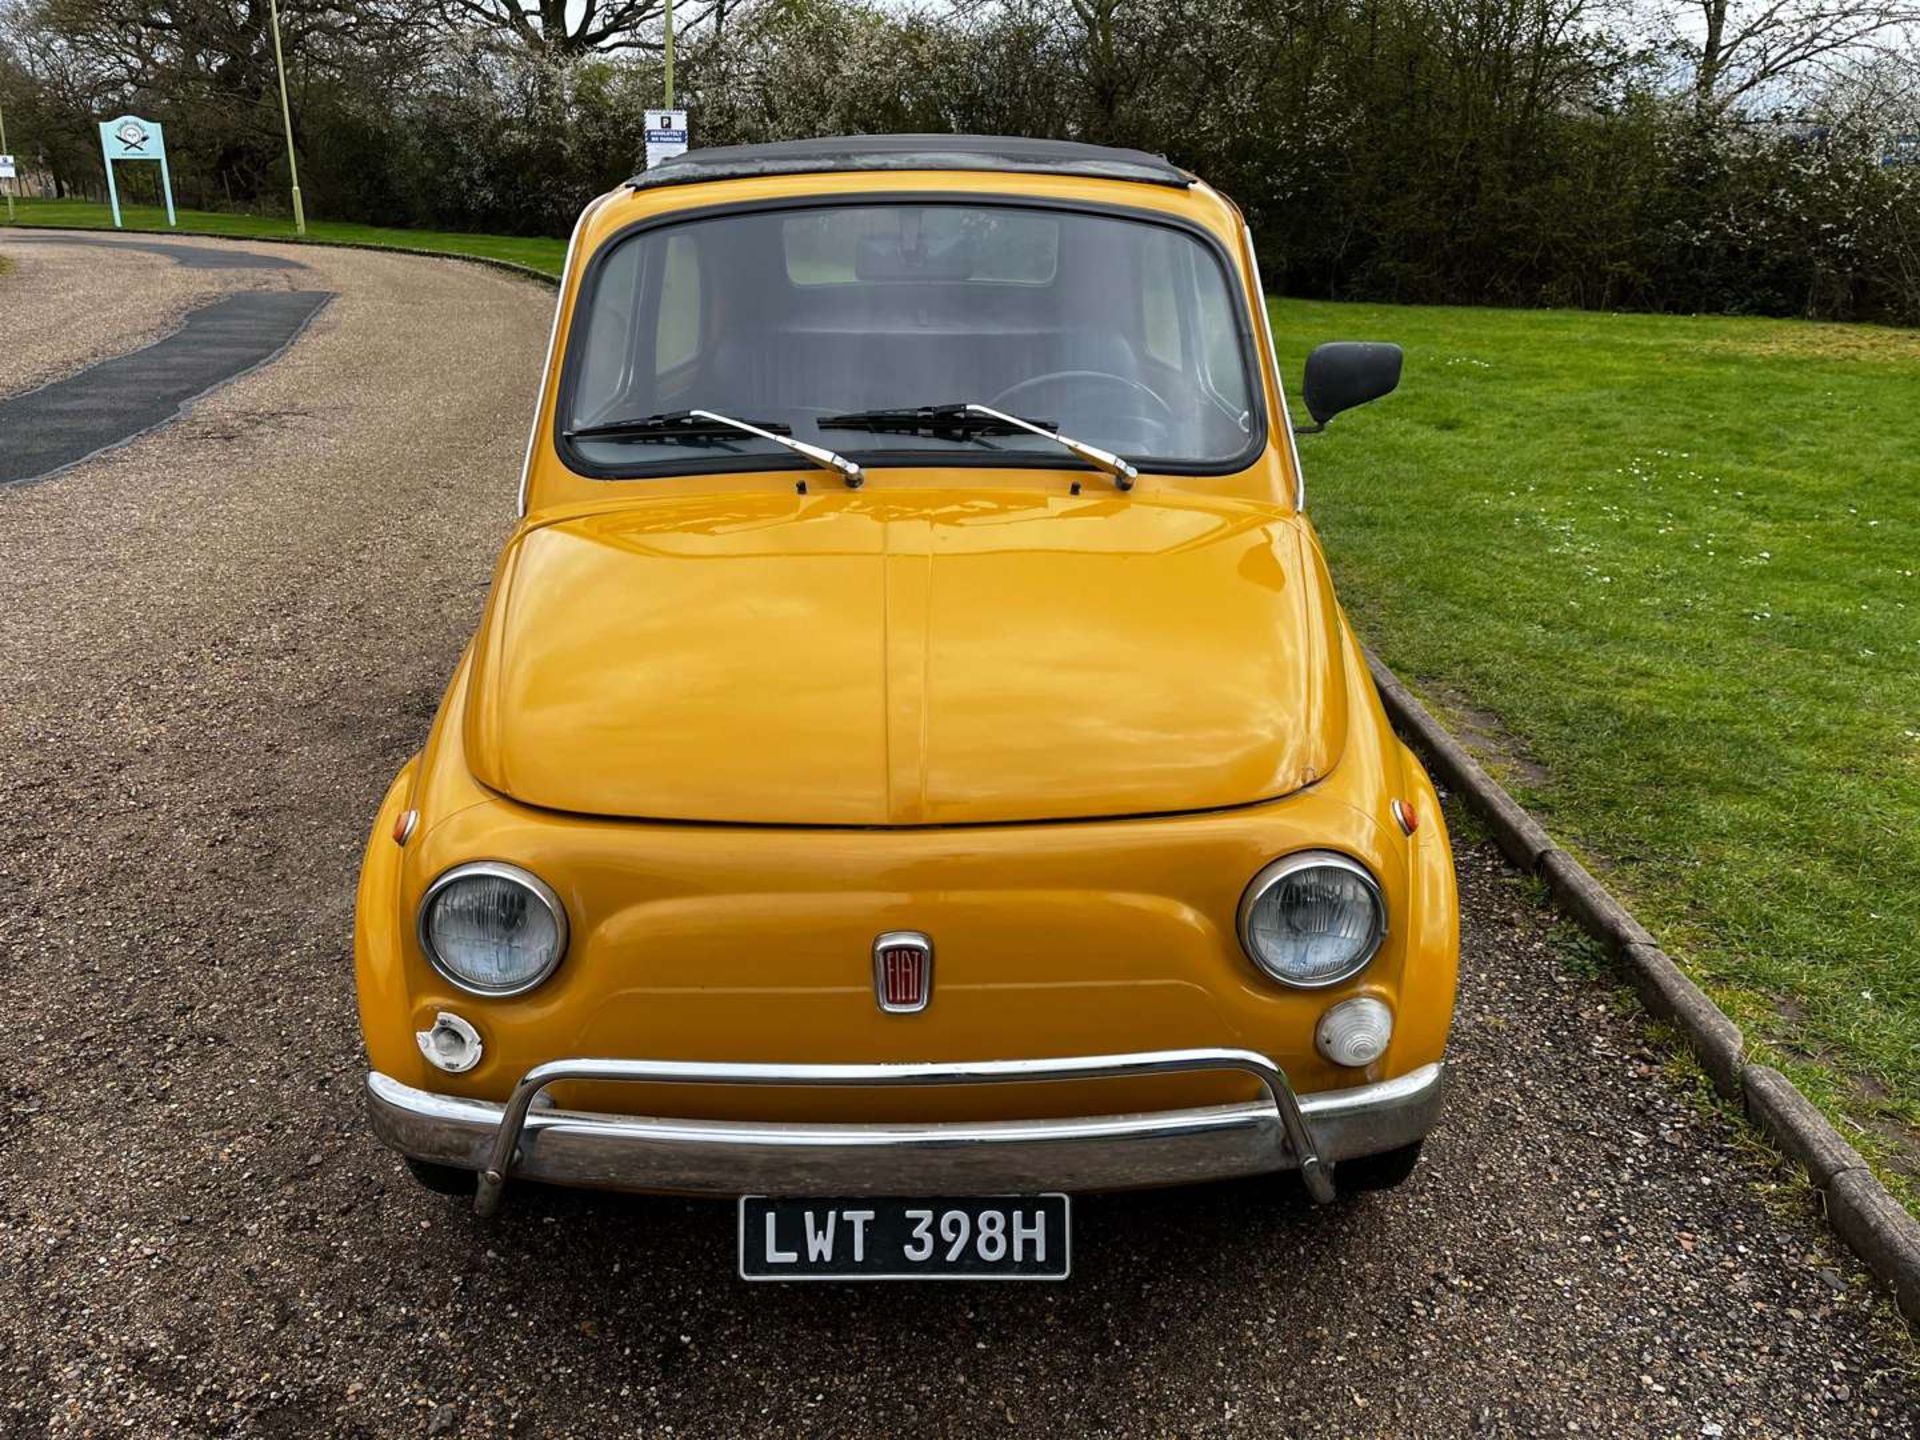 1970 FIAT 500 LHD - Image 2 of 29